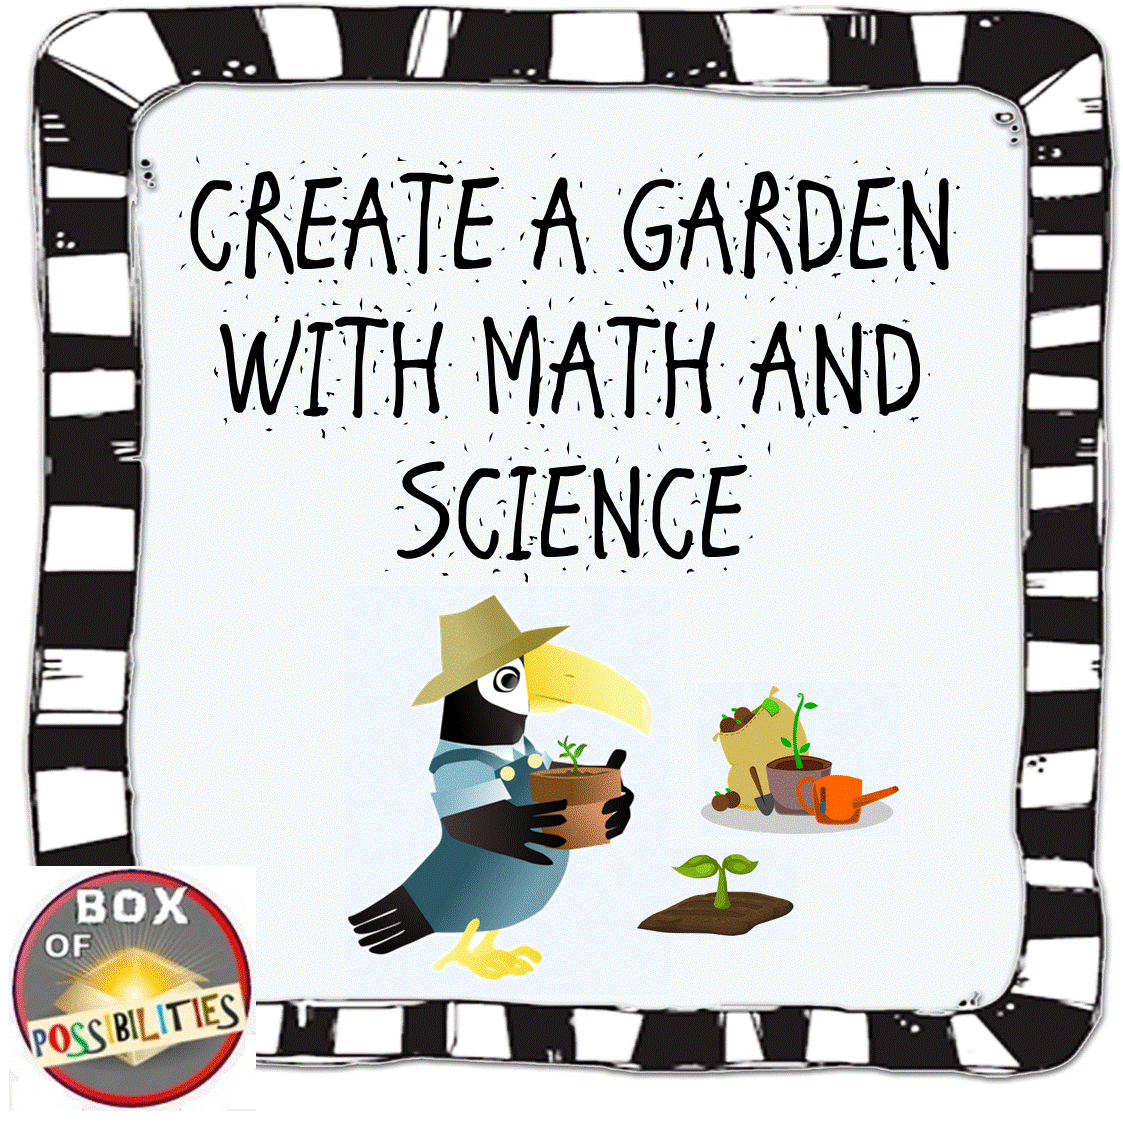 Need ideas for a school garden? Use math and science in your school garden project. This booklet gives instructions on how to combine math and science to design a garden with your students. Gardens are a great real life project which leads to a rich learning experience. Your elementary kids will love these activities as they learn about the biology of plants, calculate volume and area and create a budget for their garden. #schoolgarden #mathproject #garden #science #math #mathactivities